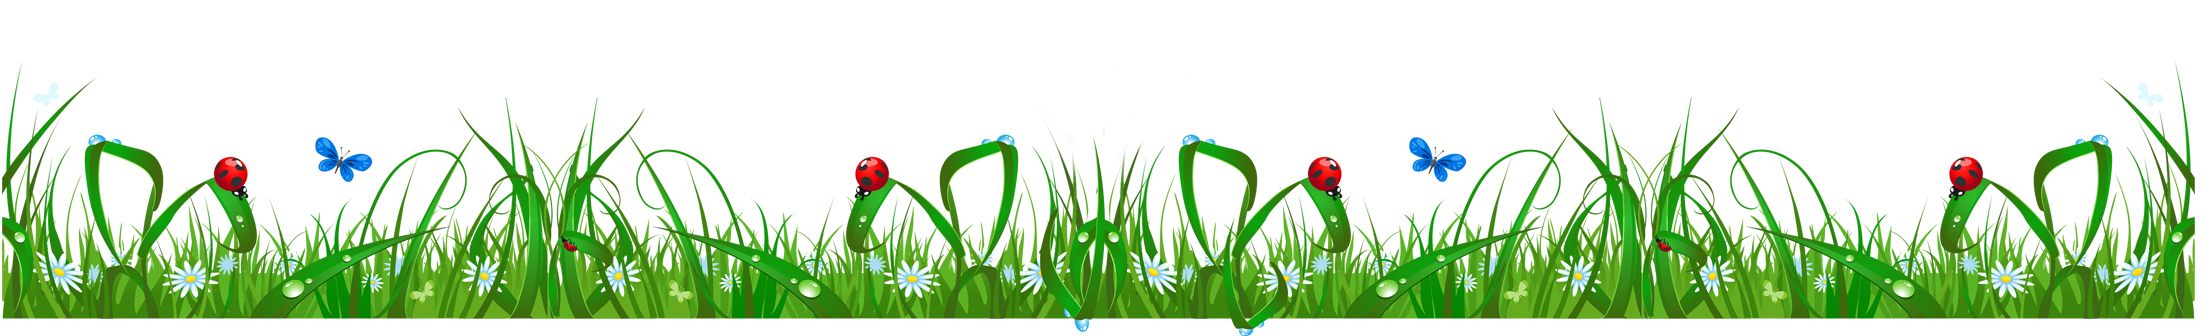 free clipart grass and flowers - photo #50